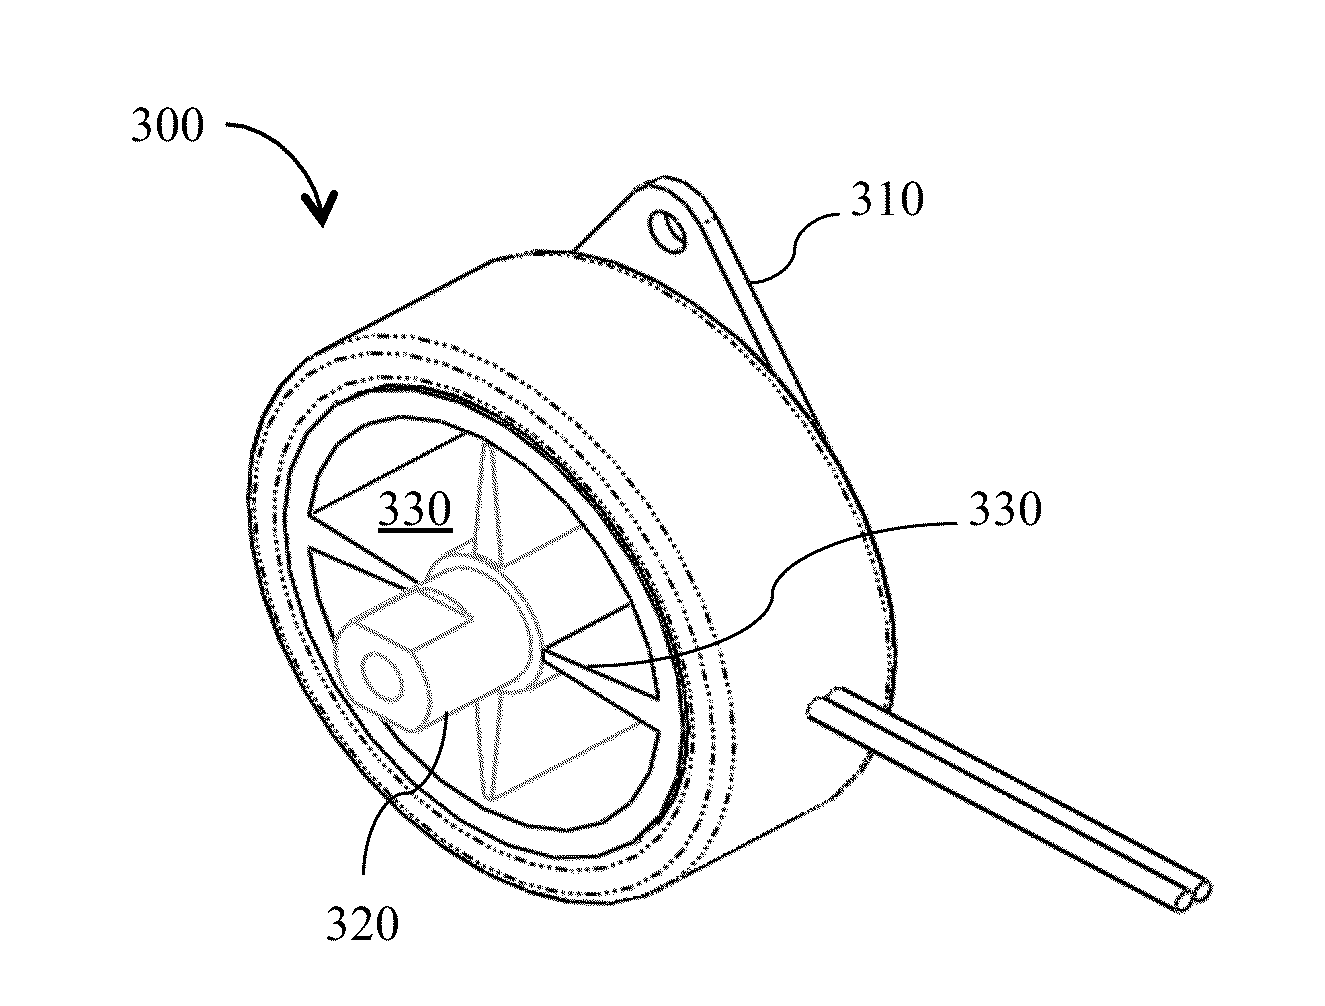 Controllable Training and Rehabilitation Device